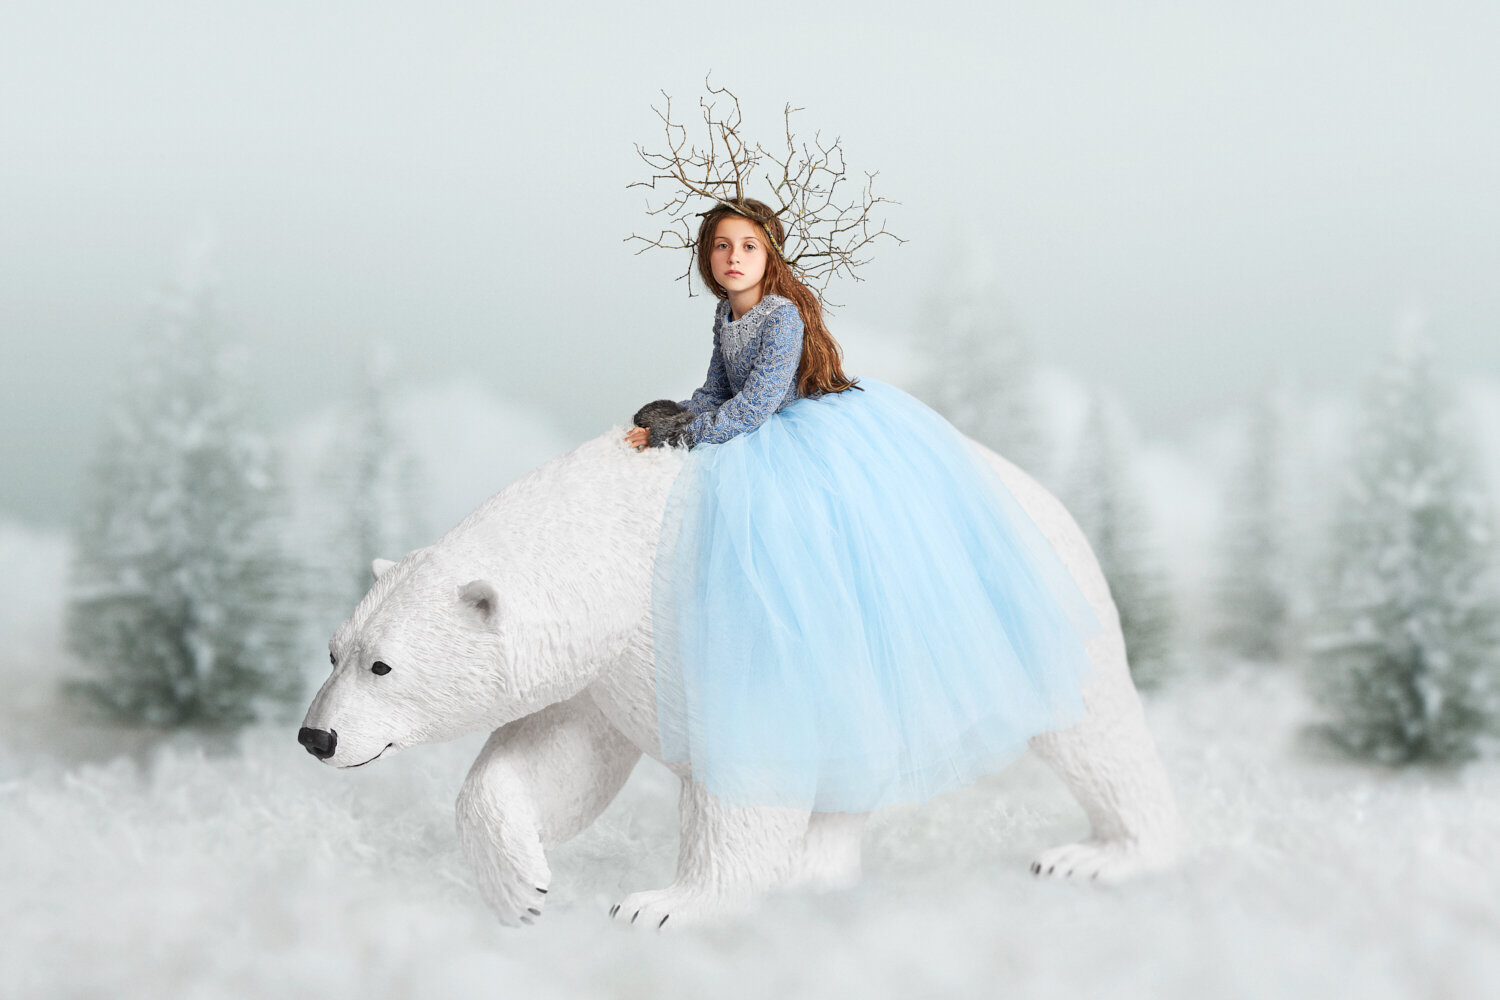 conceptual portrait of little girl with twig crown, beaded dress riding a polar bear in a winter forrest by portrait photographer Hanna Agar